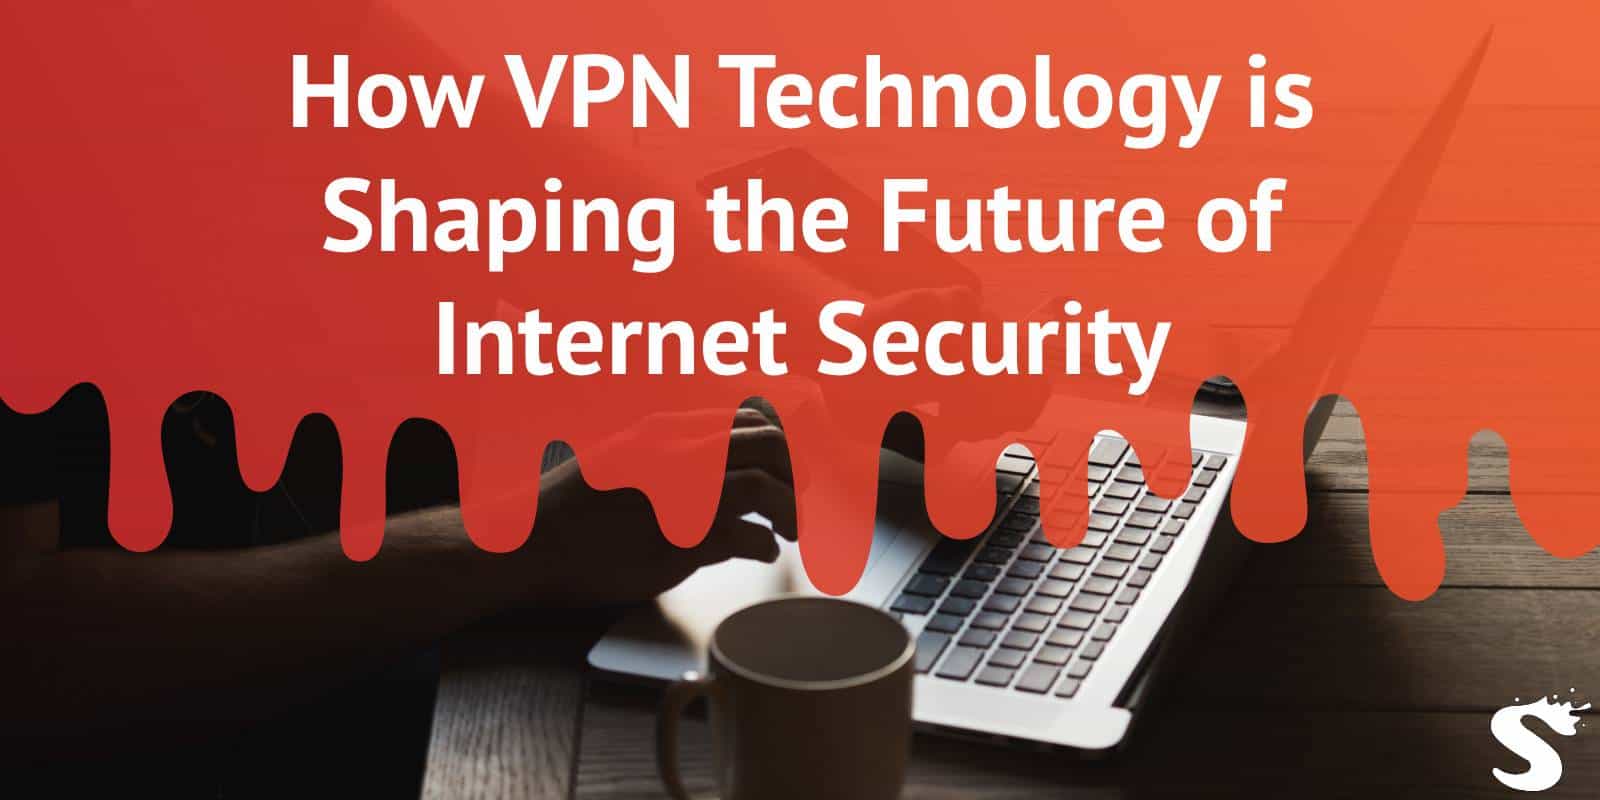 How VPN Technology is Shaping the Future of Internet Security